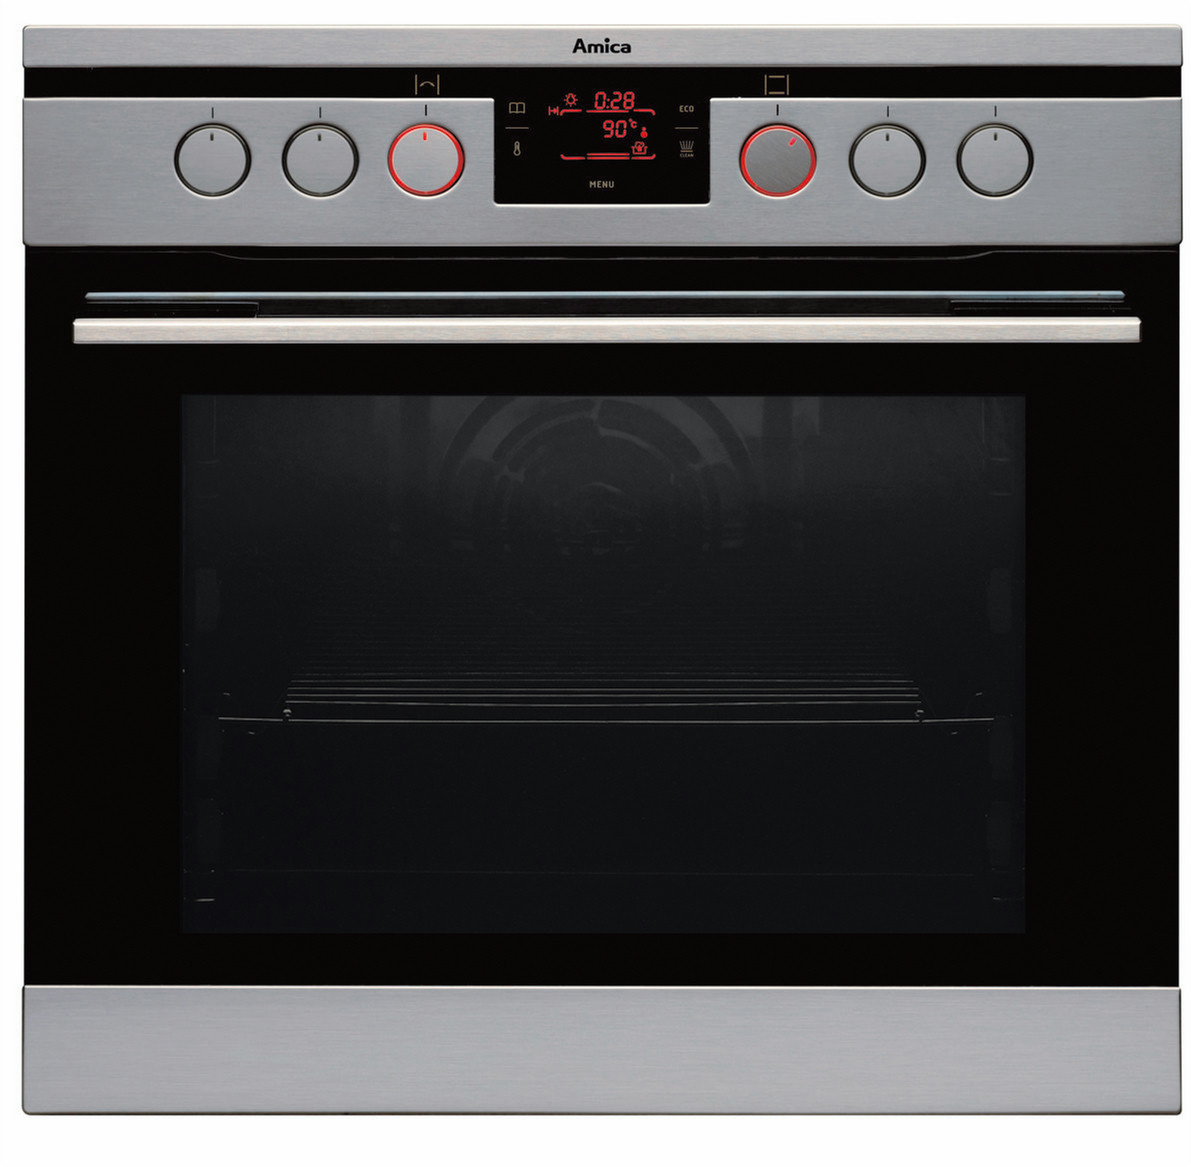 electric oven with ceramic hob